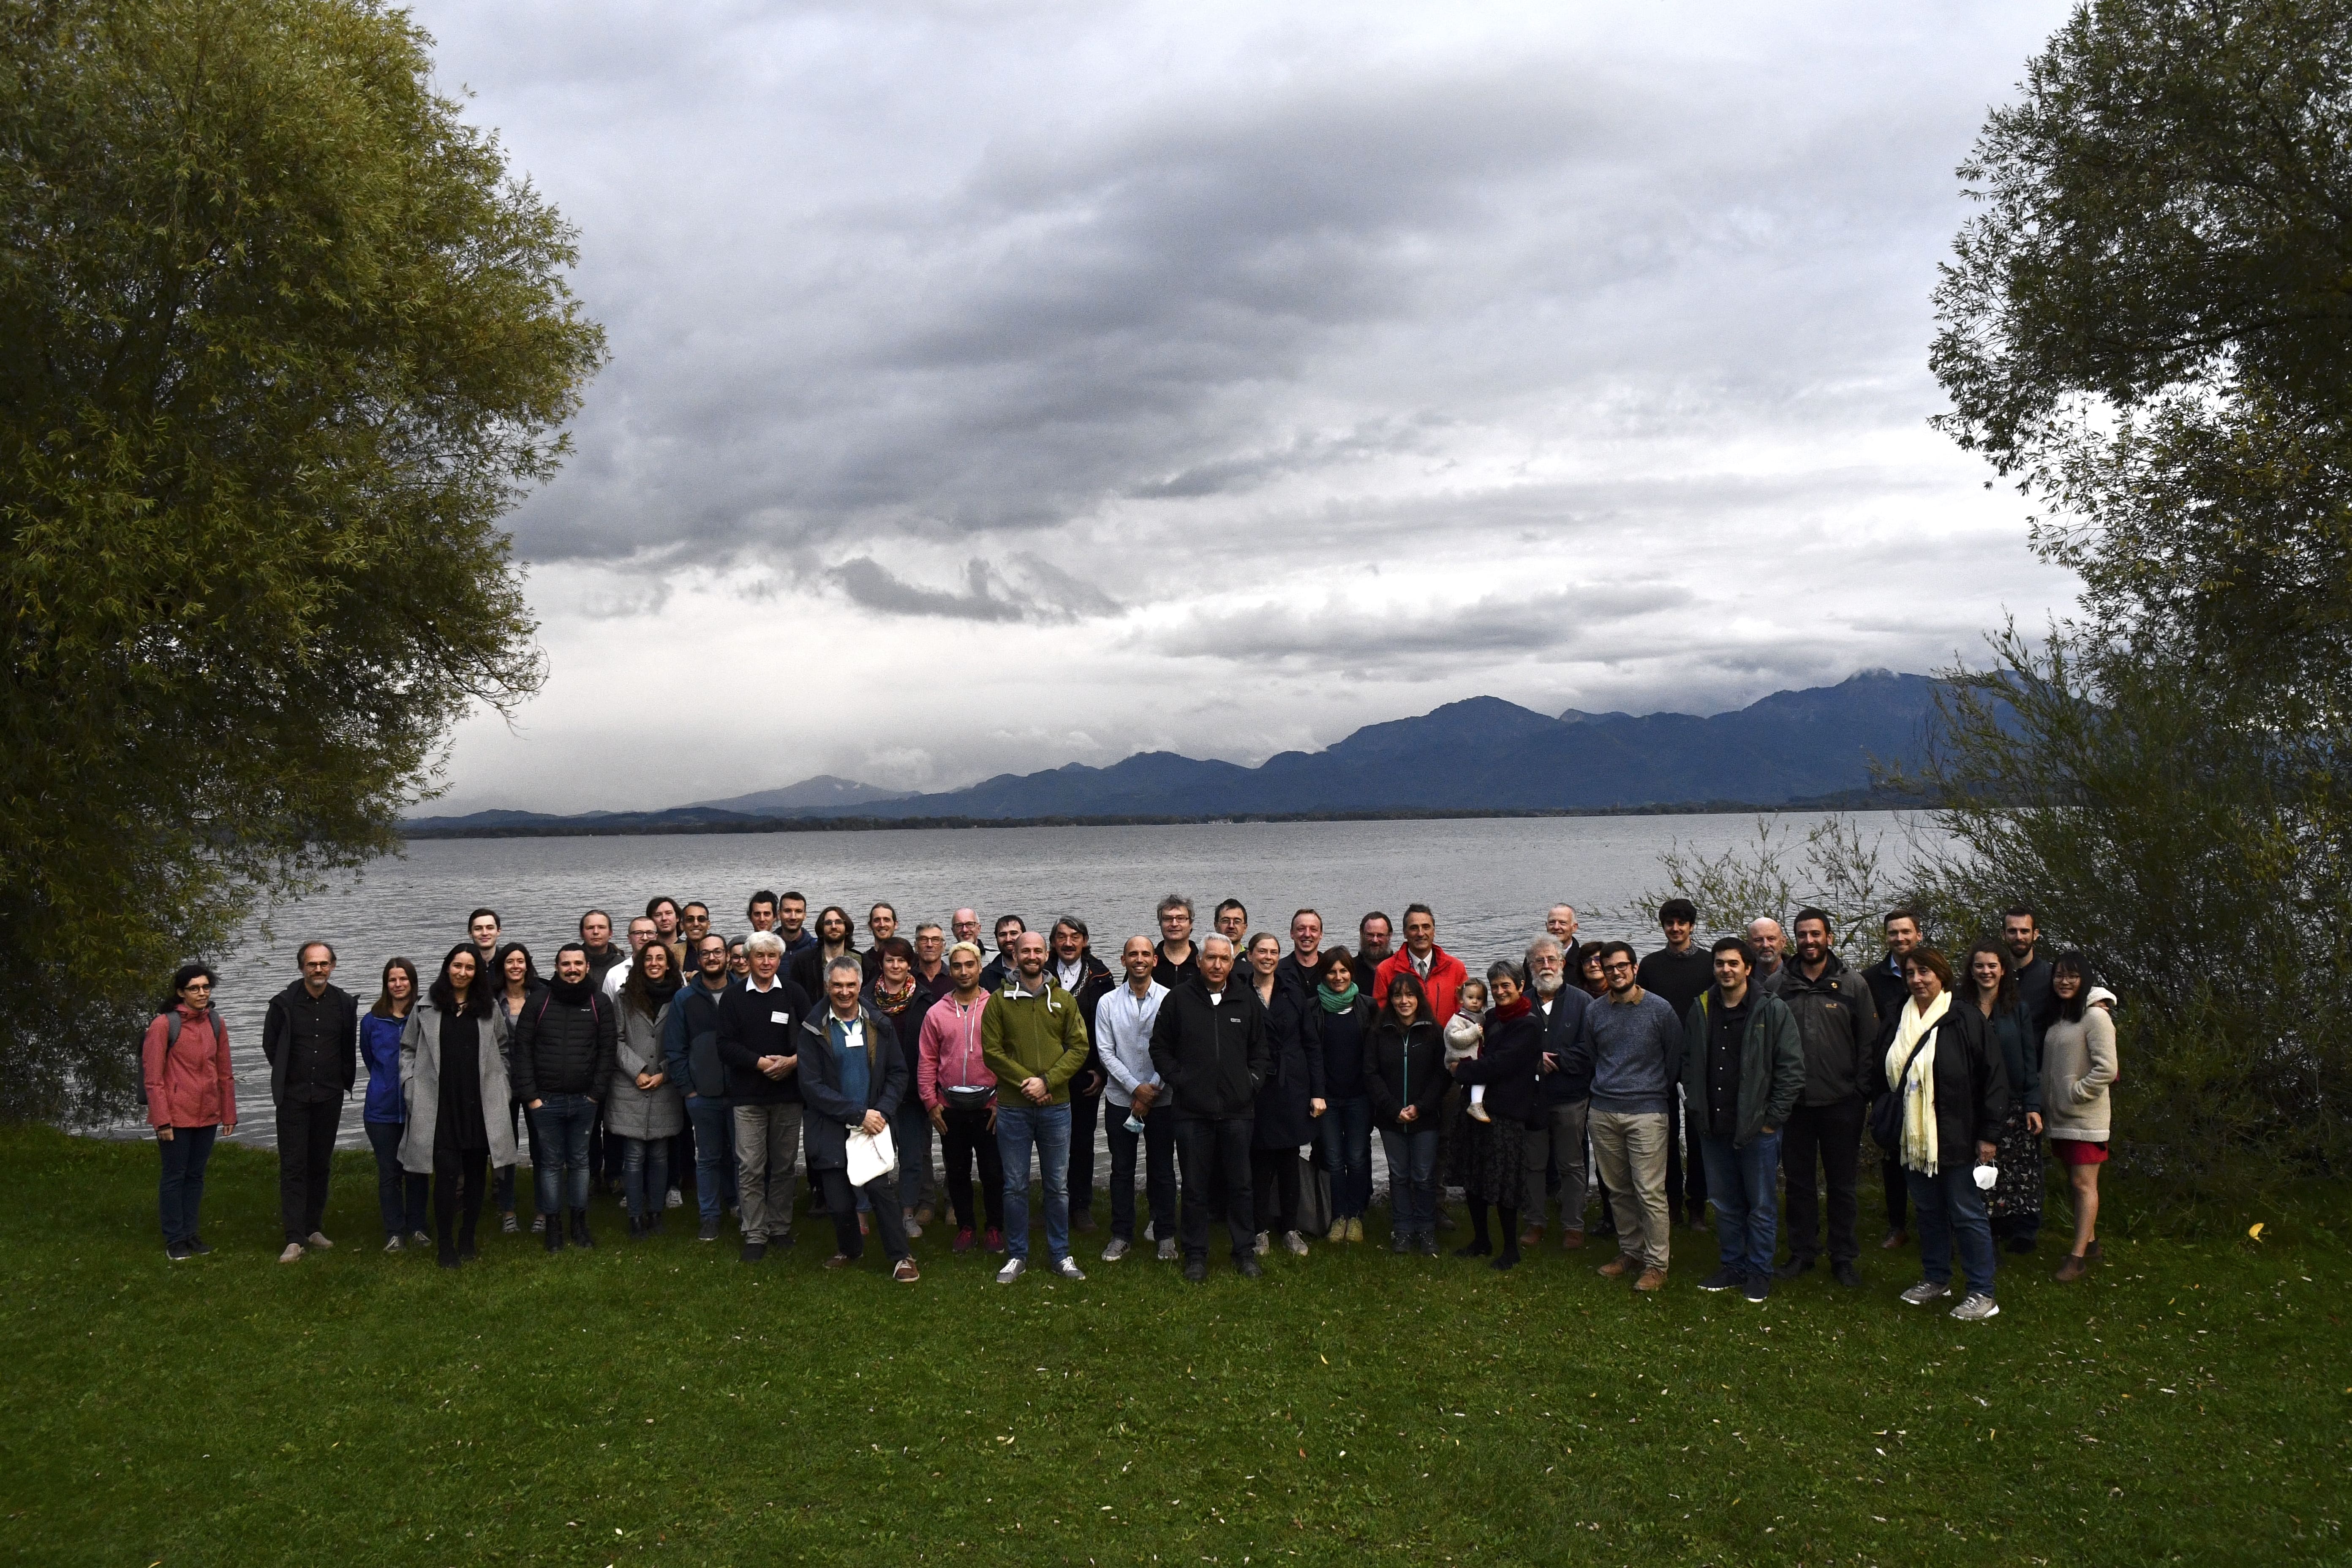 Conference picture of the Conference `Homological Methods in Representation Theory' on the Fraueninsel in 2021